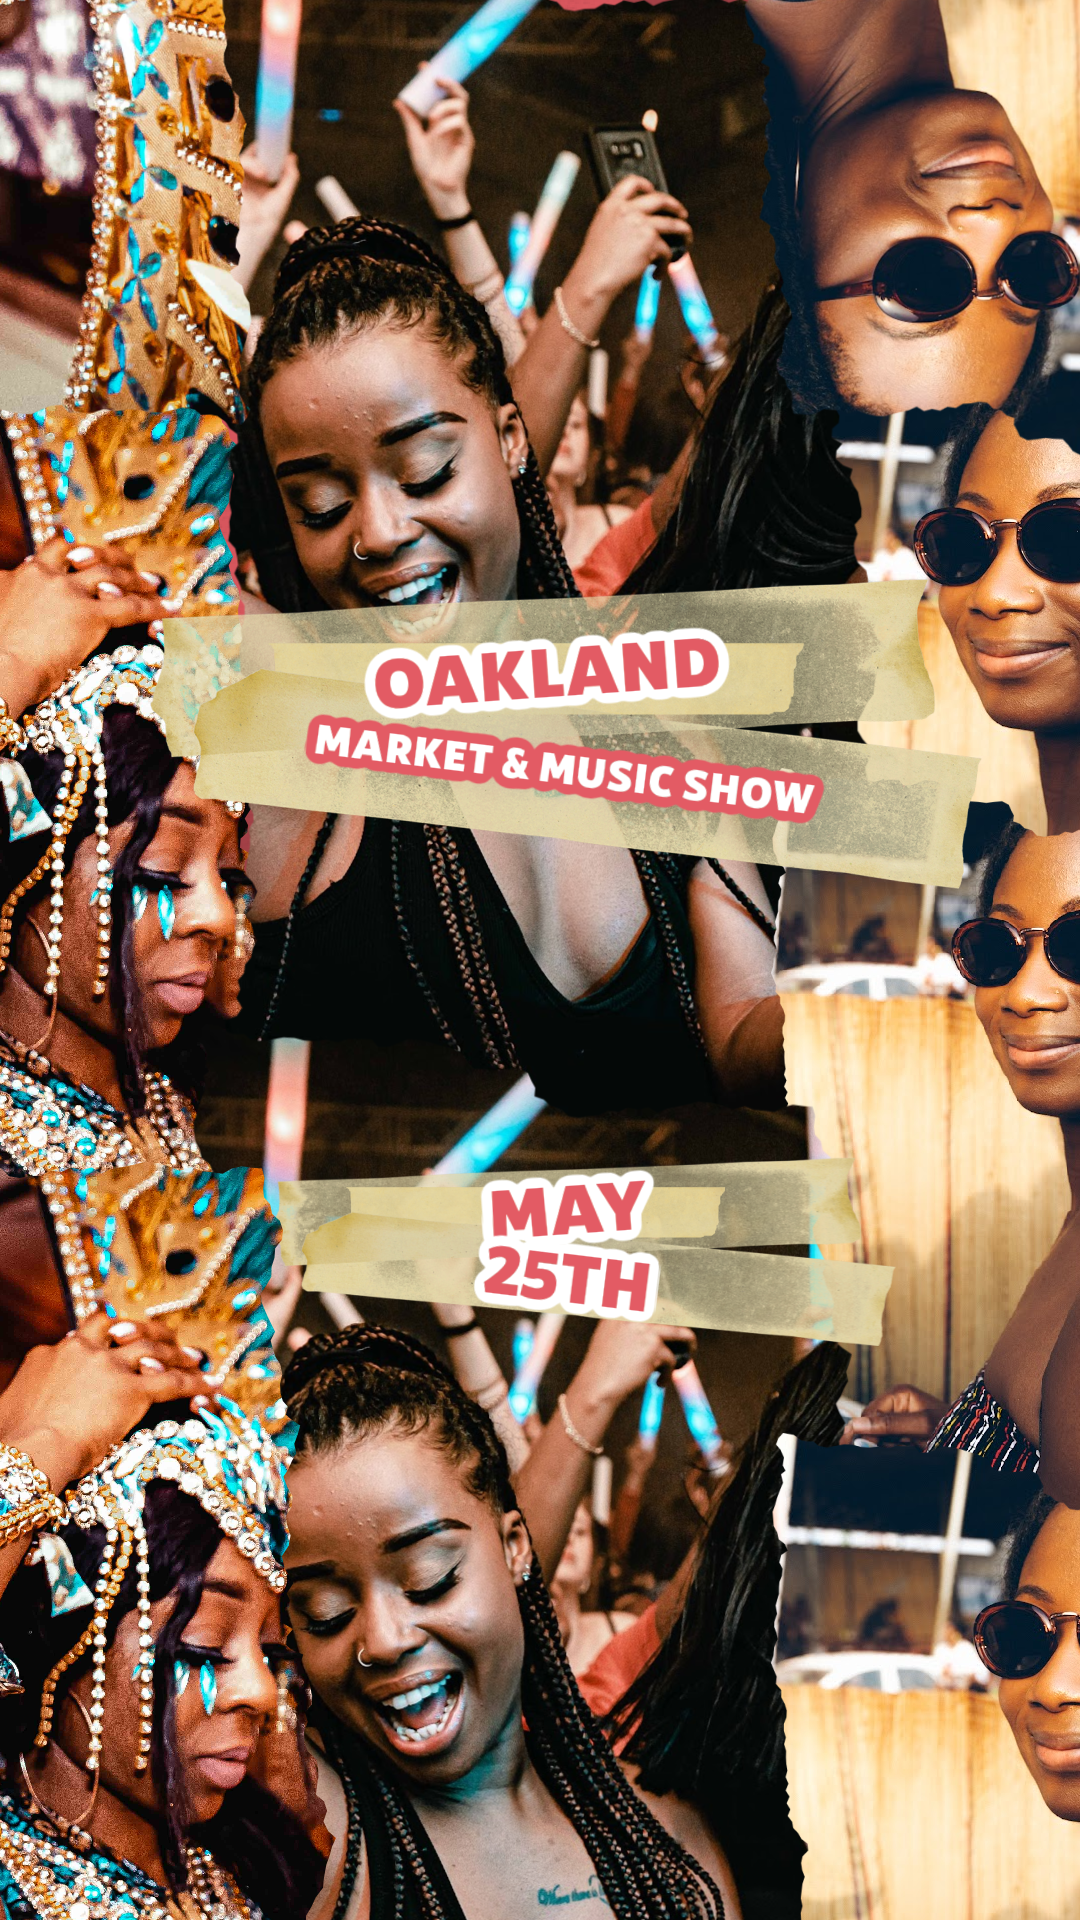 AfroSocaLove : Oakland Party & BlackOwned Market (Feat Maga Stories & More) - Afro Soca Love Supply